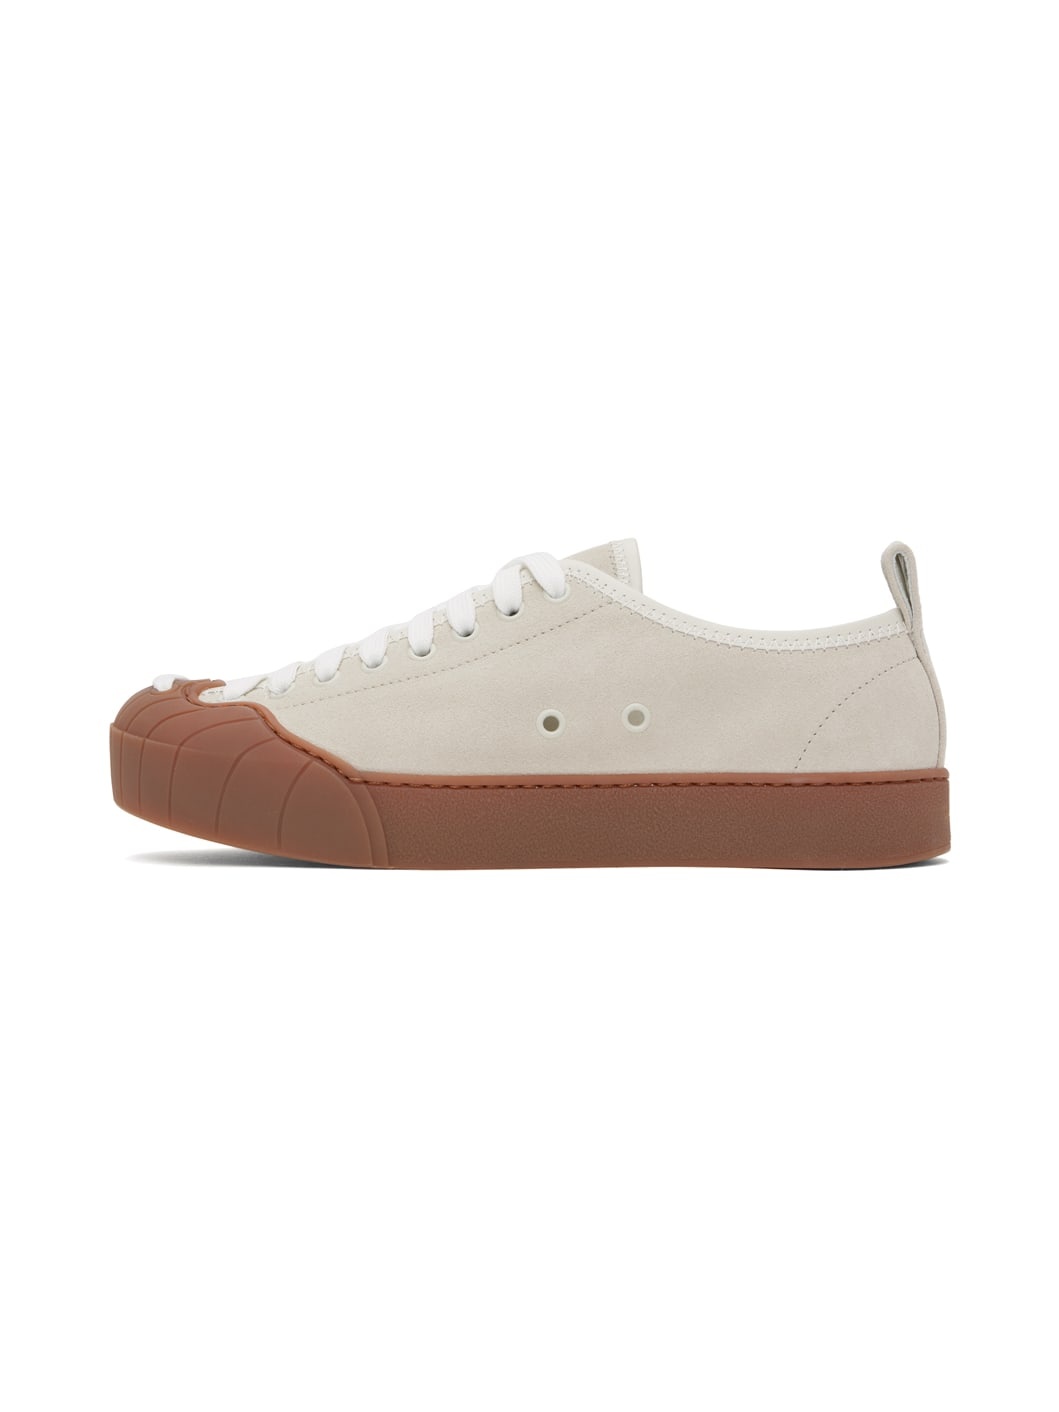 Off-White Isi Low Sneakers - 3